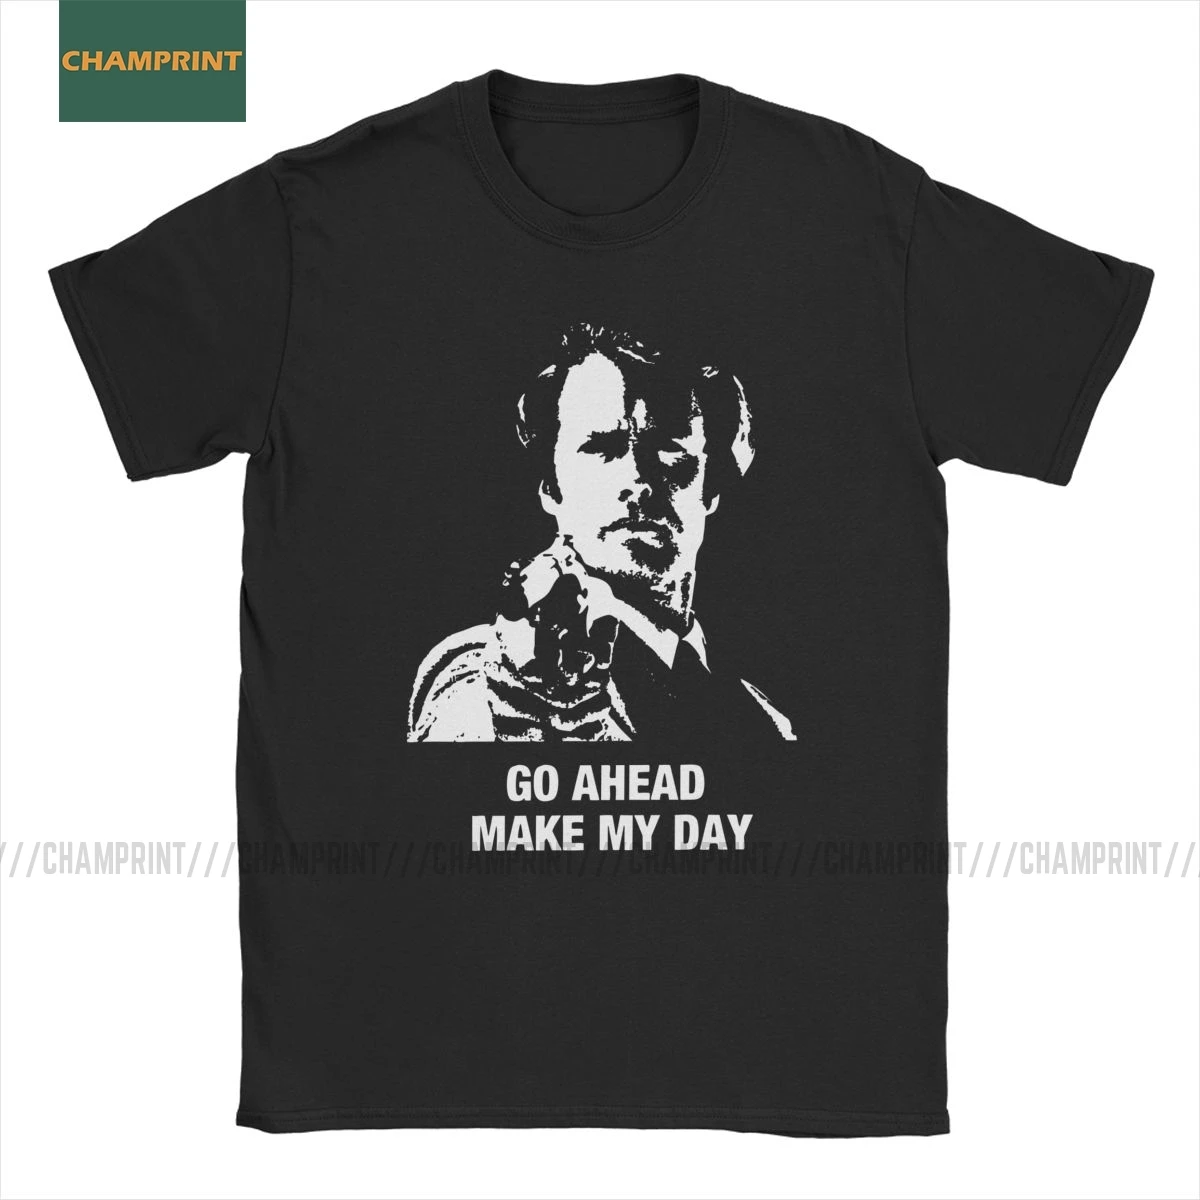 Go Ahead Make My Day Dirty Harry Clint Eastwood T-Shirts Men Make My Day Cotton Tees Short Sleeve T Shirts 6XL Tops